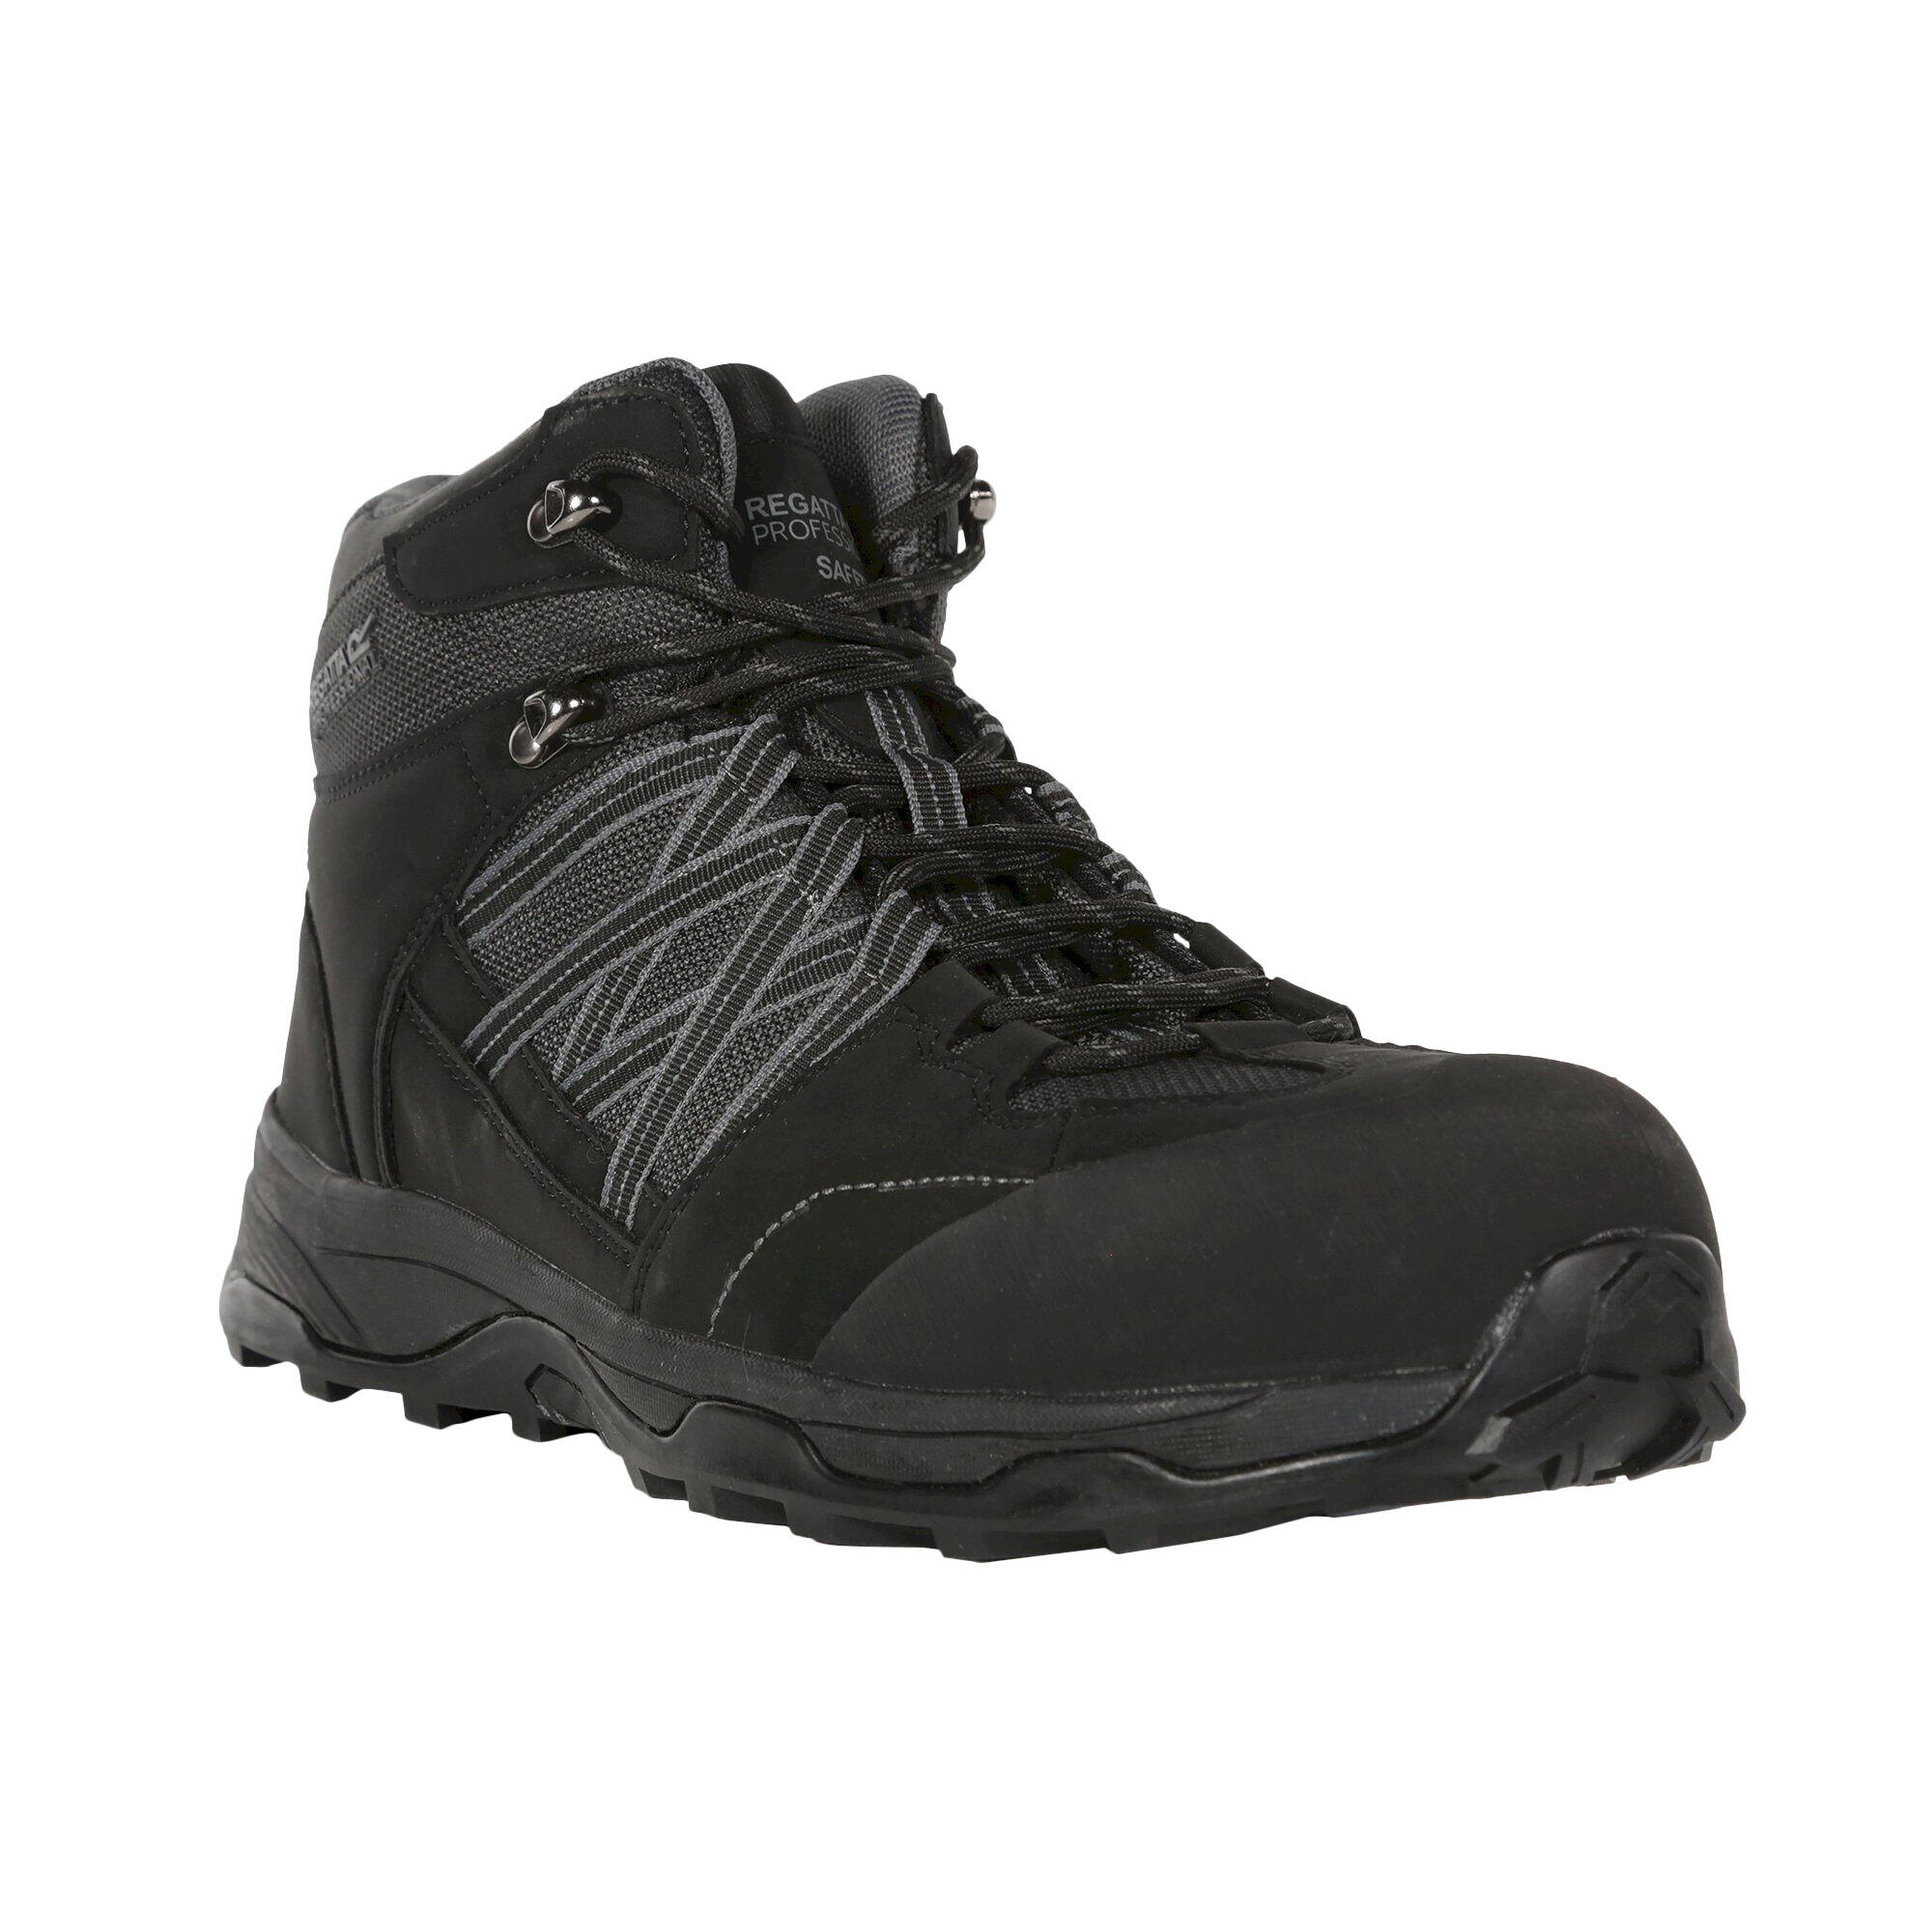 Mens Claystone S3 Safety Boots (Black/Granite) 1/5